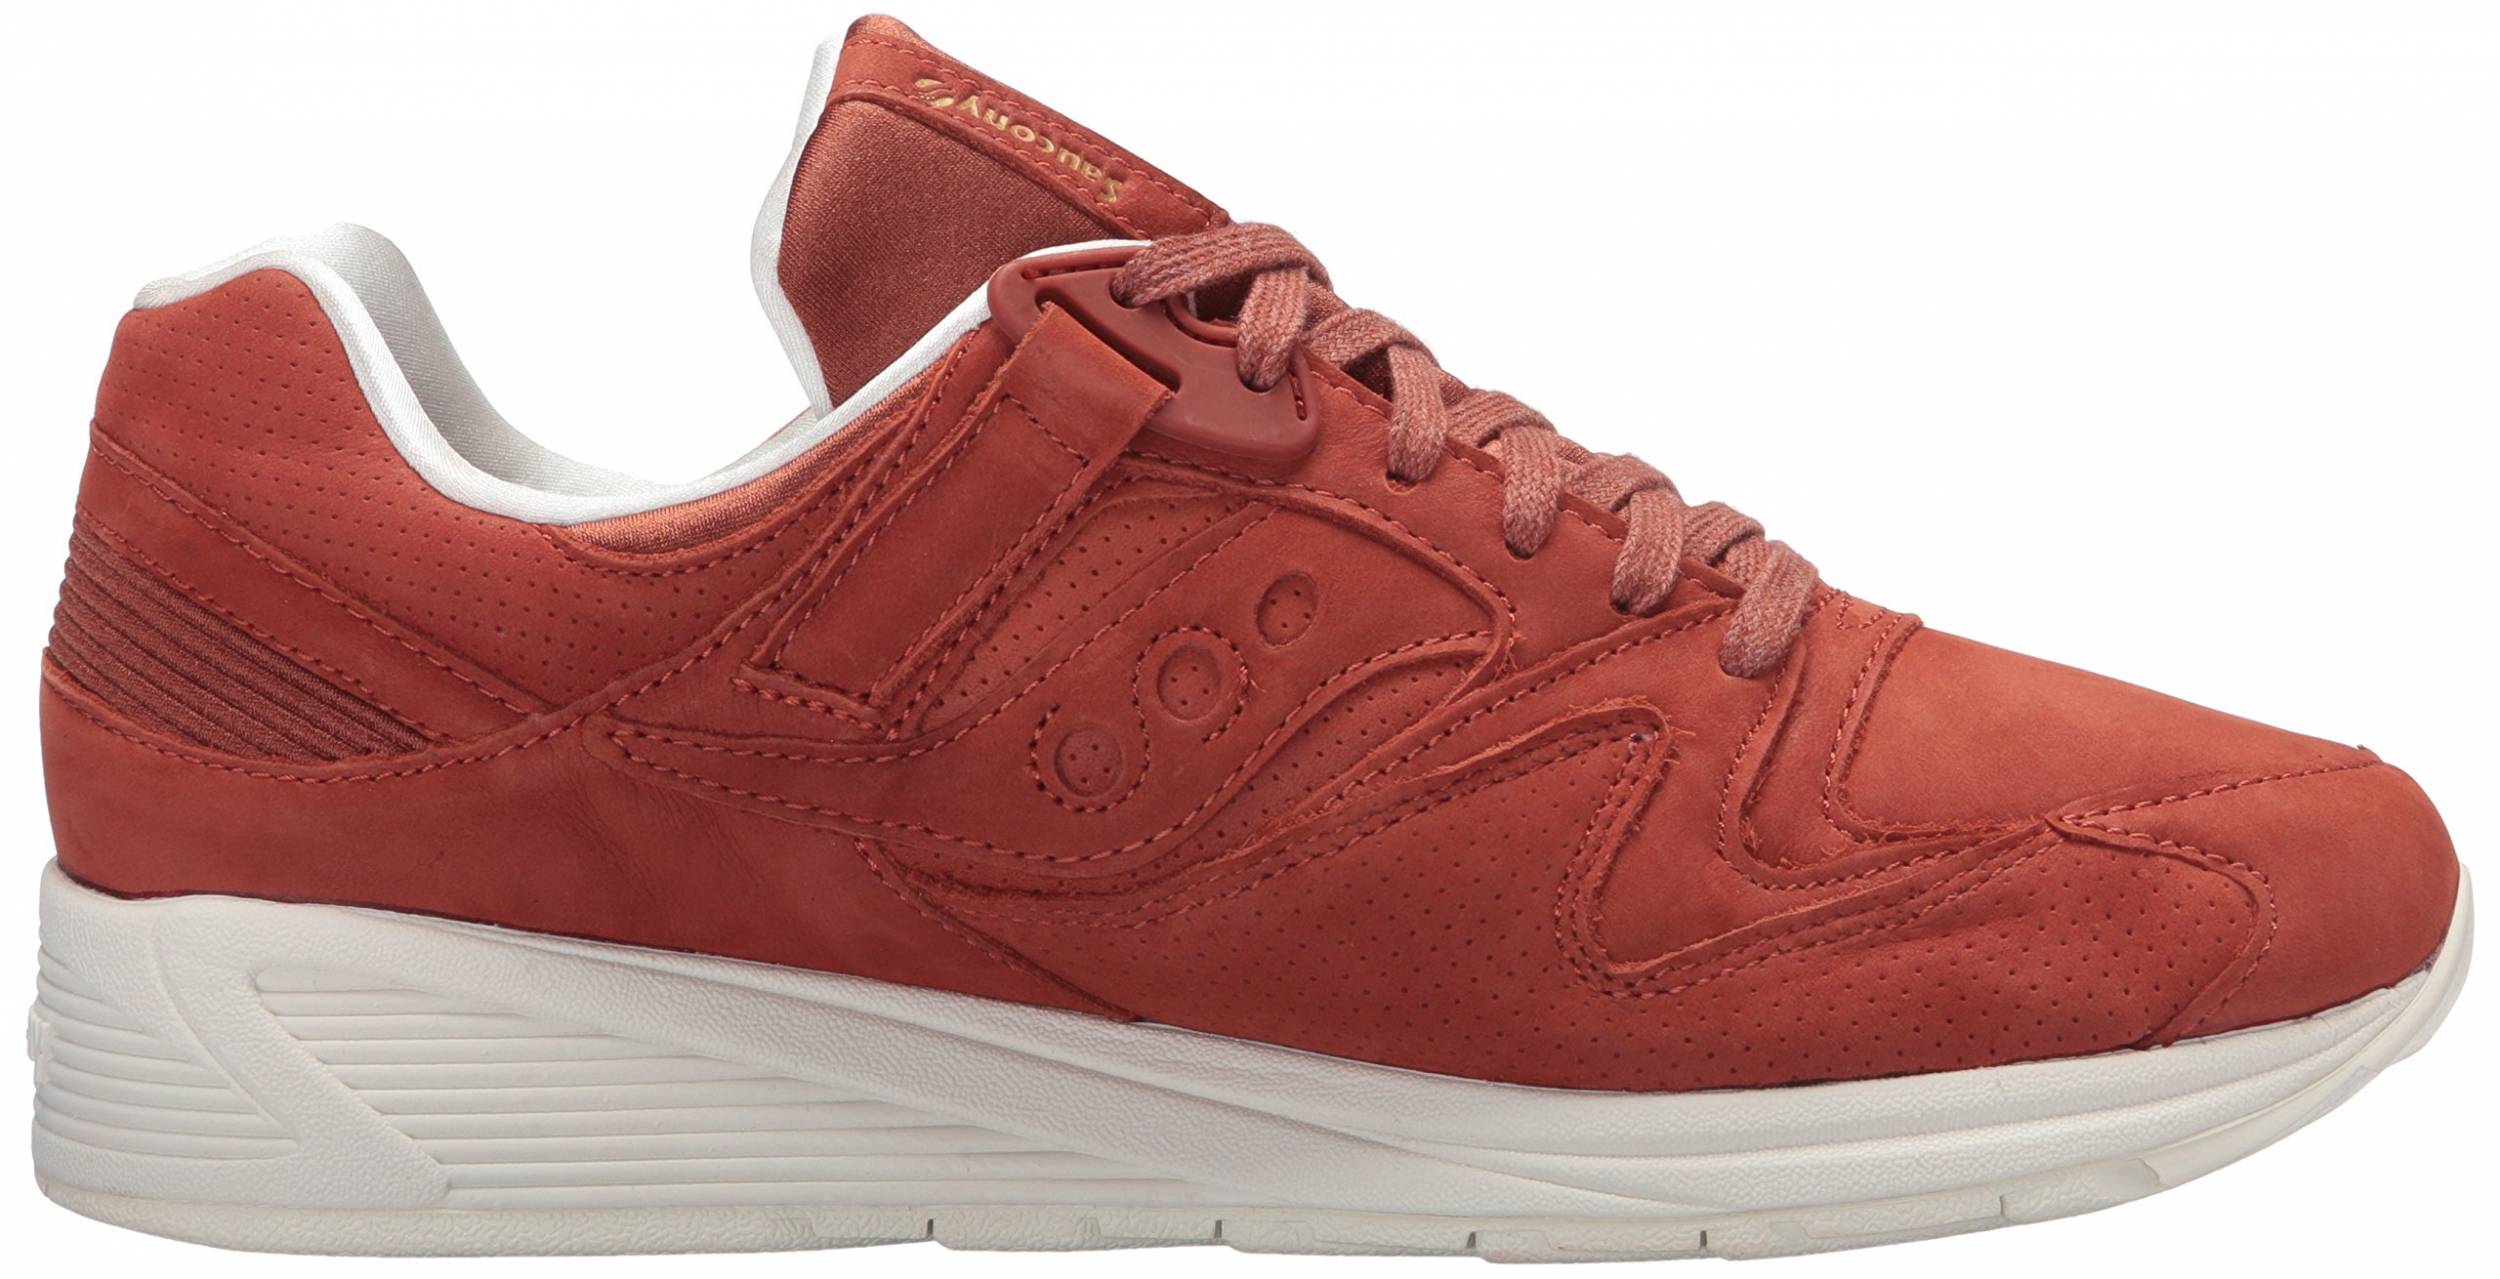 Saucony Grid 8500 sneakers (only $85 